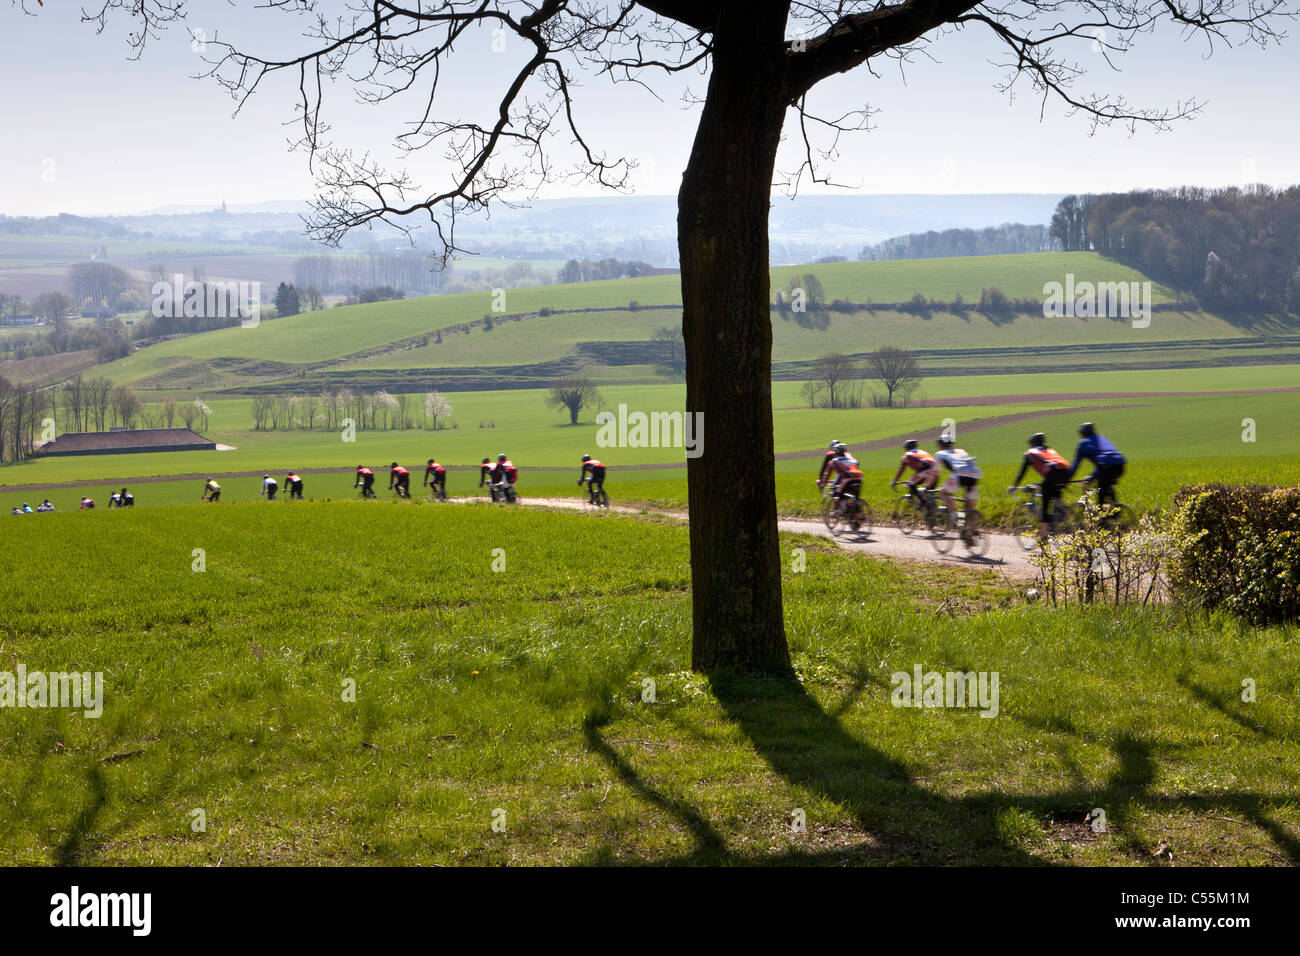 The Netherlands, Gulpen. Cyclists taking part in tourversion of Amstel Gold Race 2010. Stock Photo